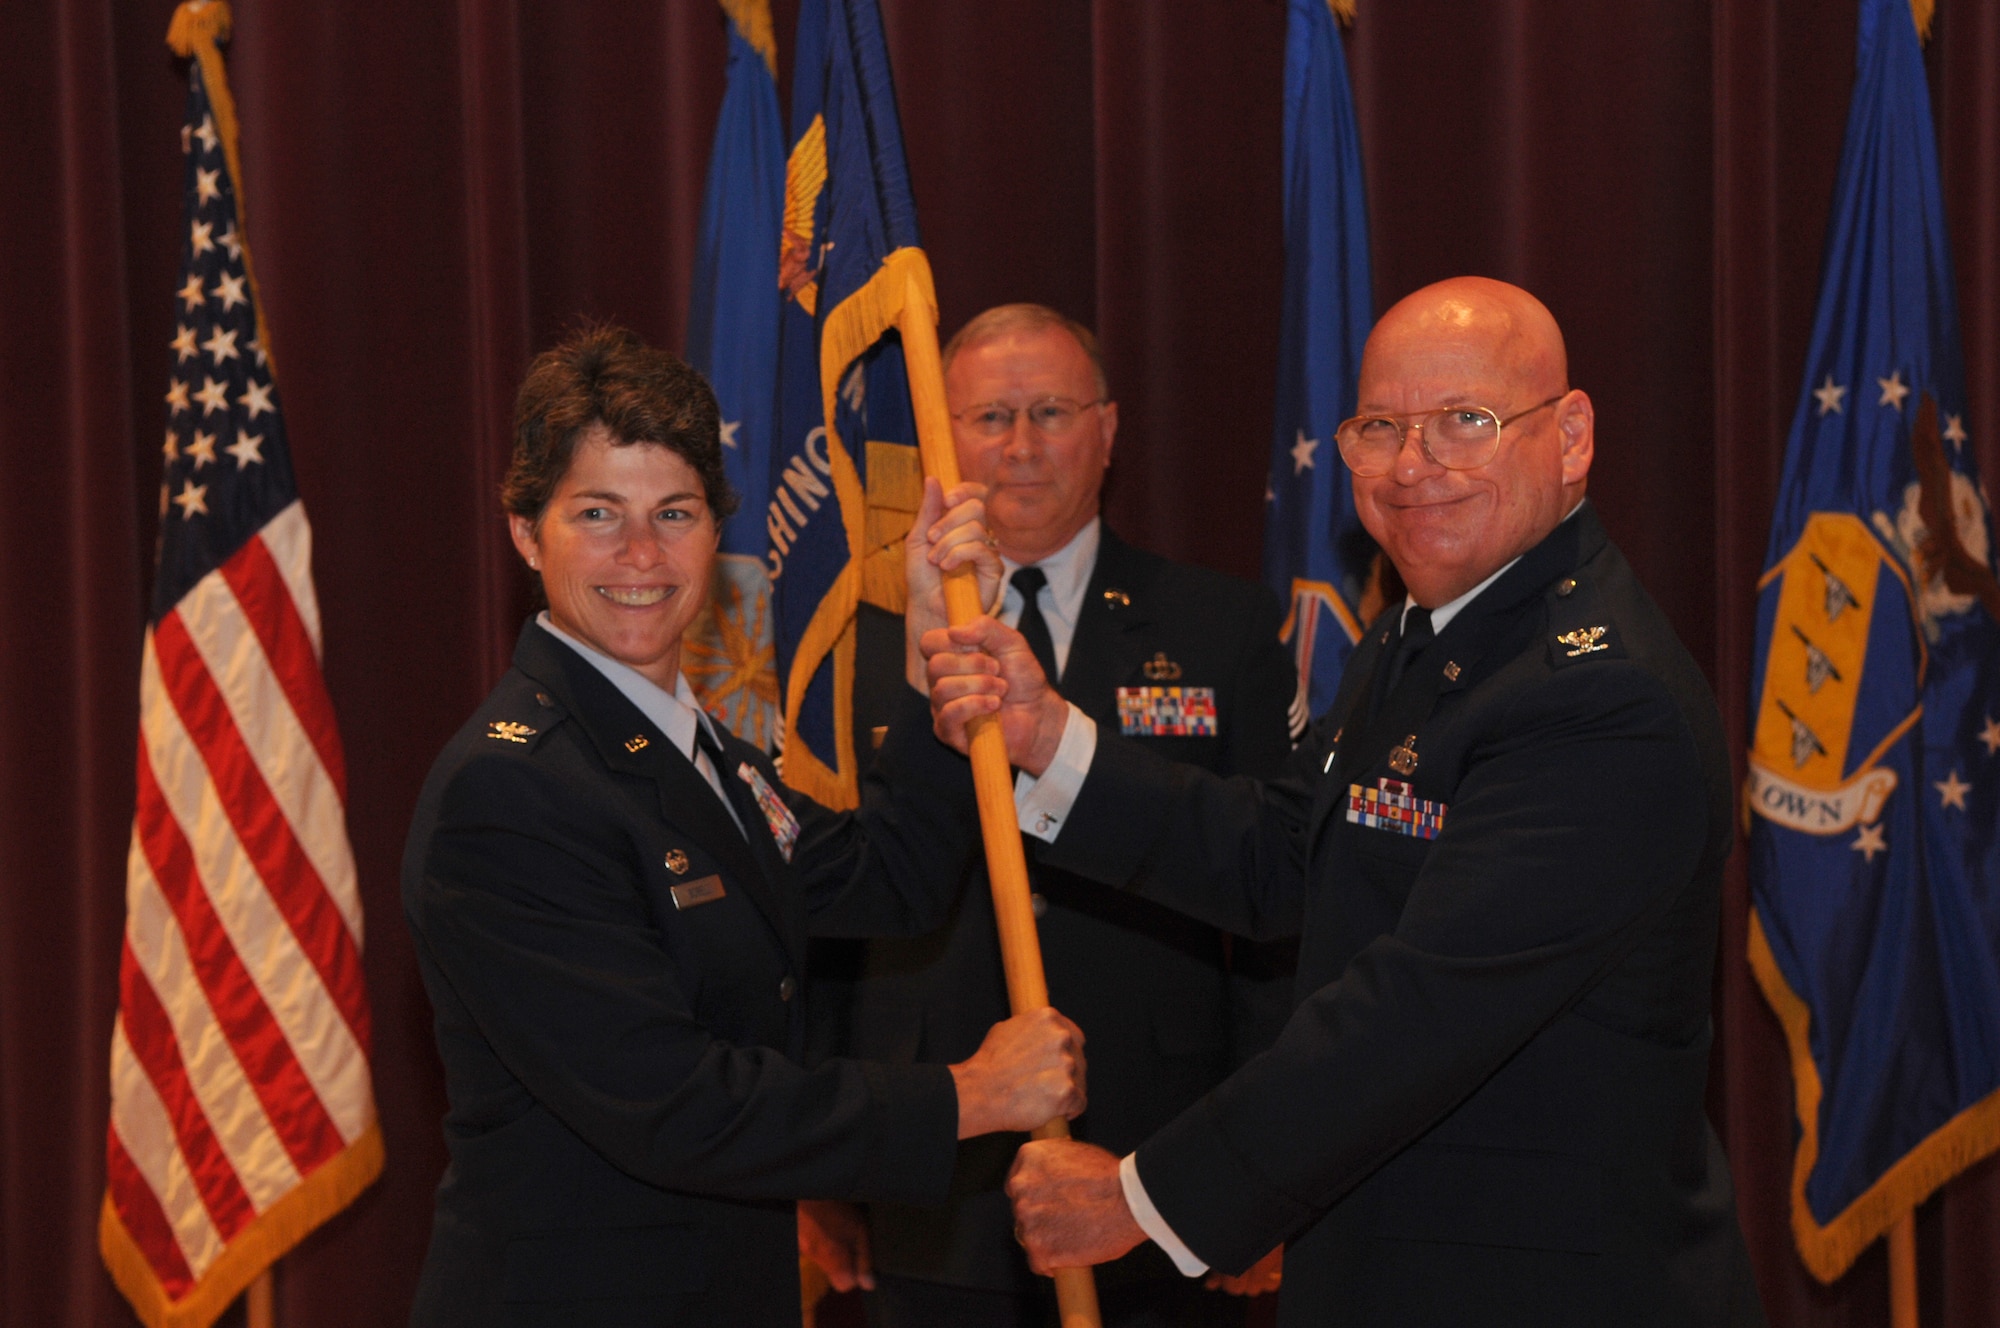 Col. Elizabeth Borelli, commander of the 11th Operations Group, accepts the United States Air Force Band guidon from Col. Dennis M. Layendecker during a change of command ceremony in Hangar 2 on Bolling Air Force Base, June 30. The ceremony marked Colonel Layendecker’s final day as commander of the U.S. Air Force Band.  (U.S. Air Force photo by Senior Airman Sean Adams)